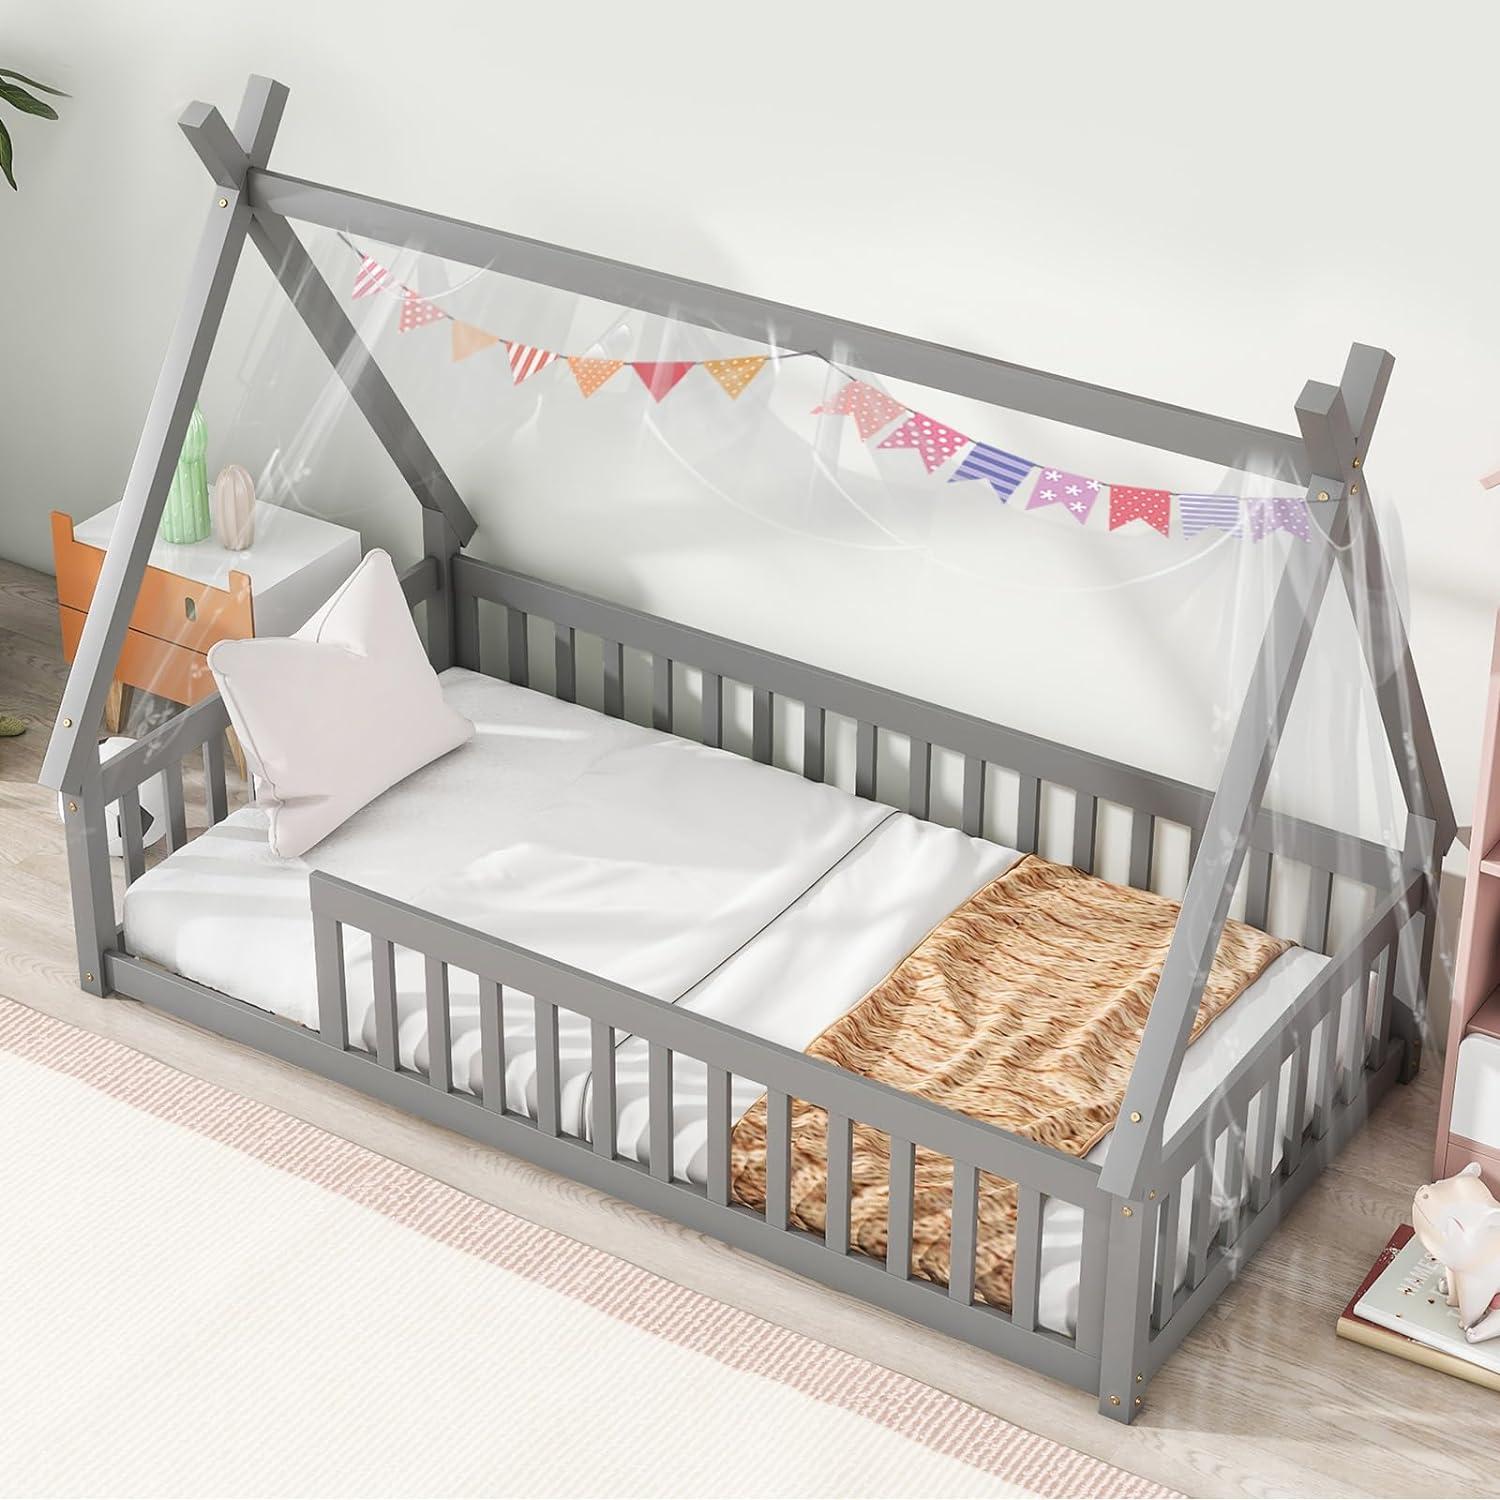 Montessori Tatub Twin Teepe Floor Bed Frame With Railings Without Door Gray